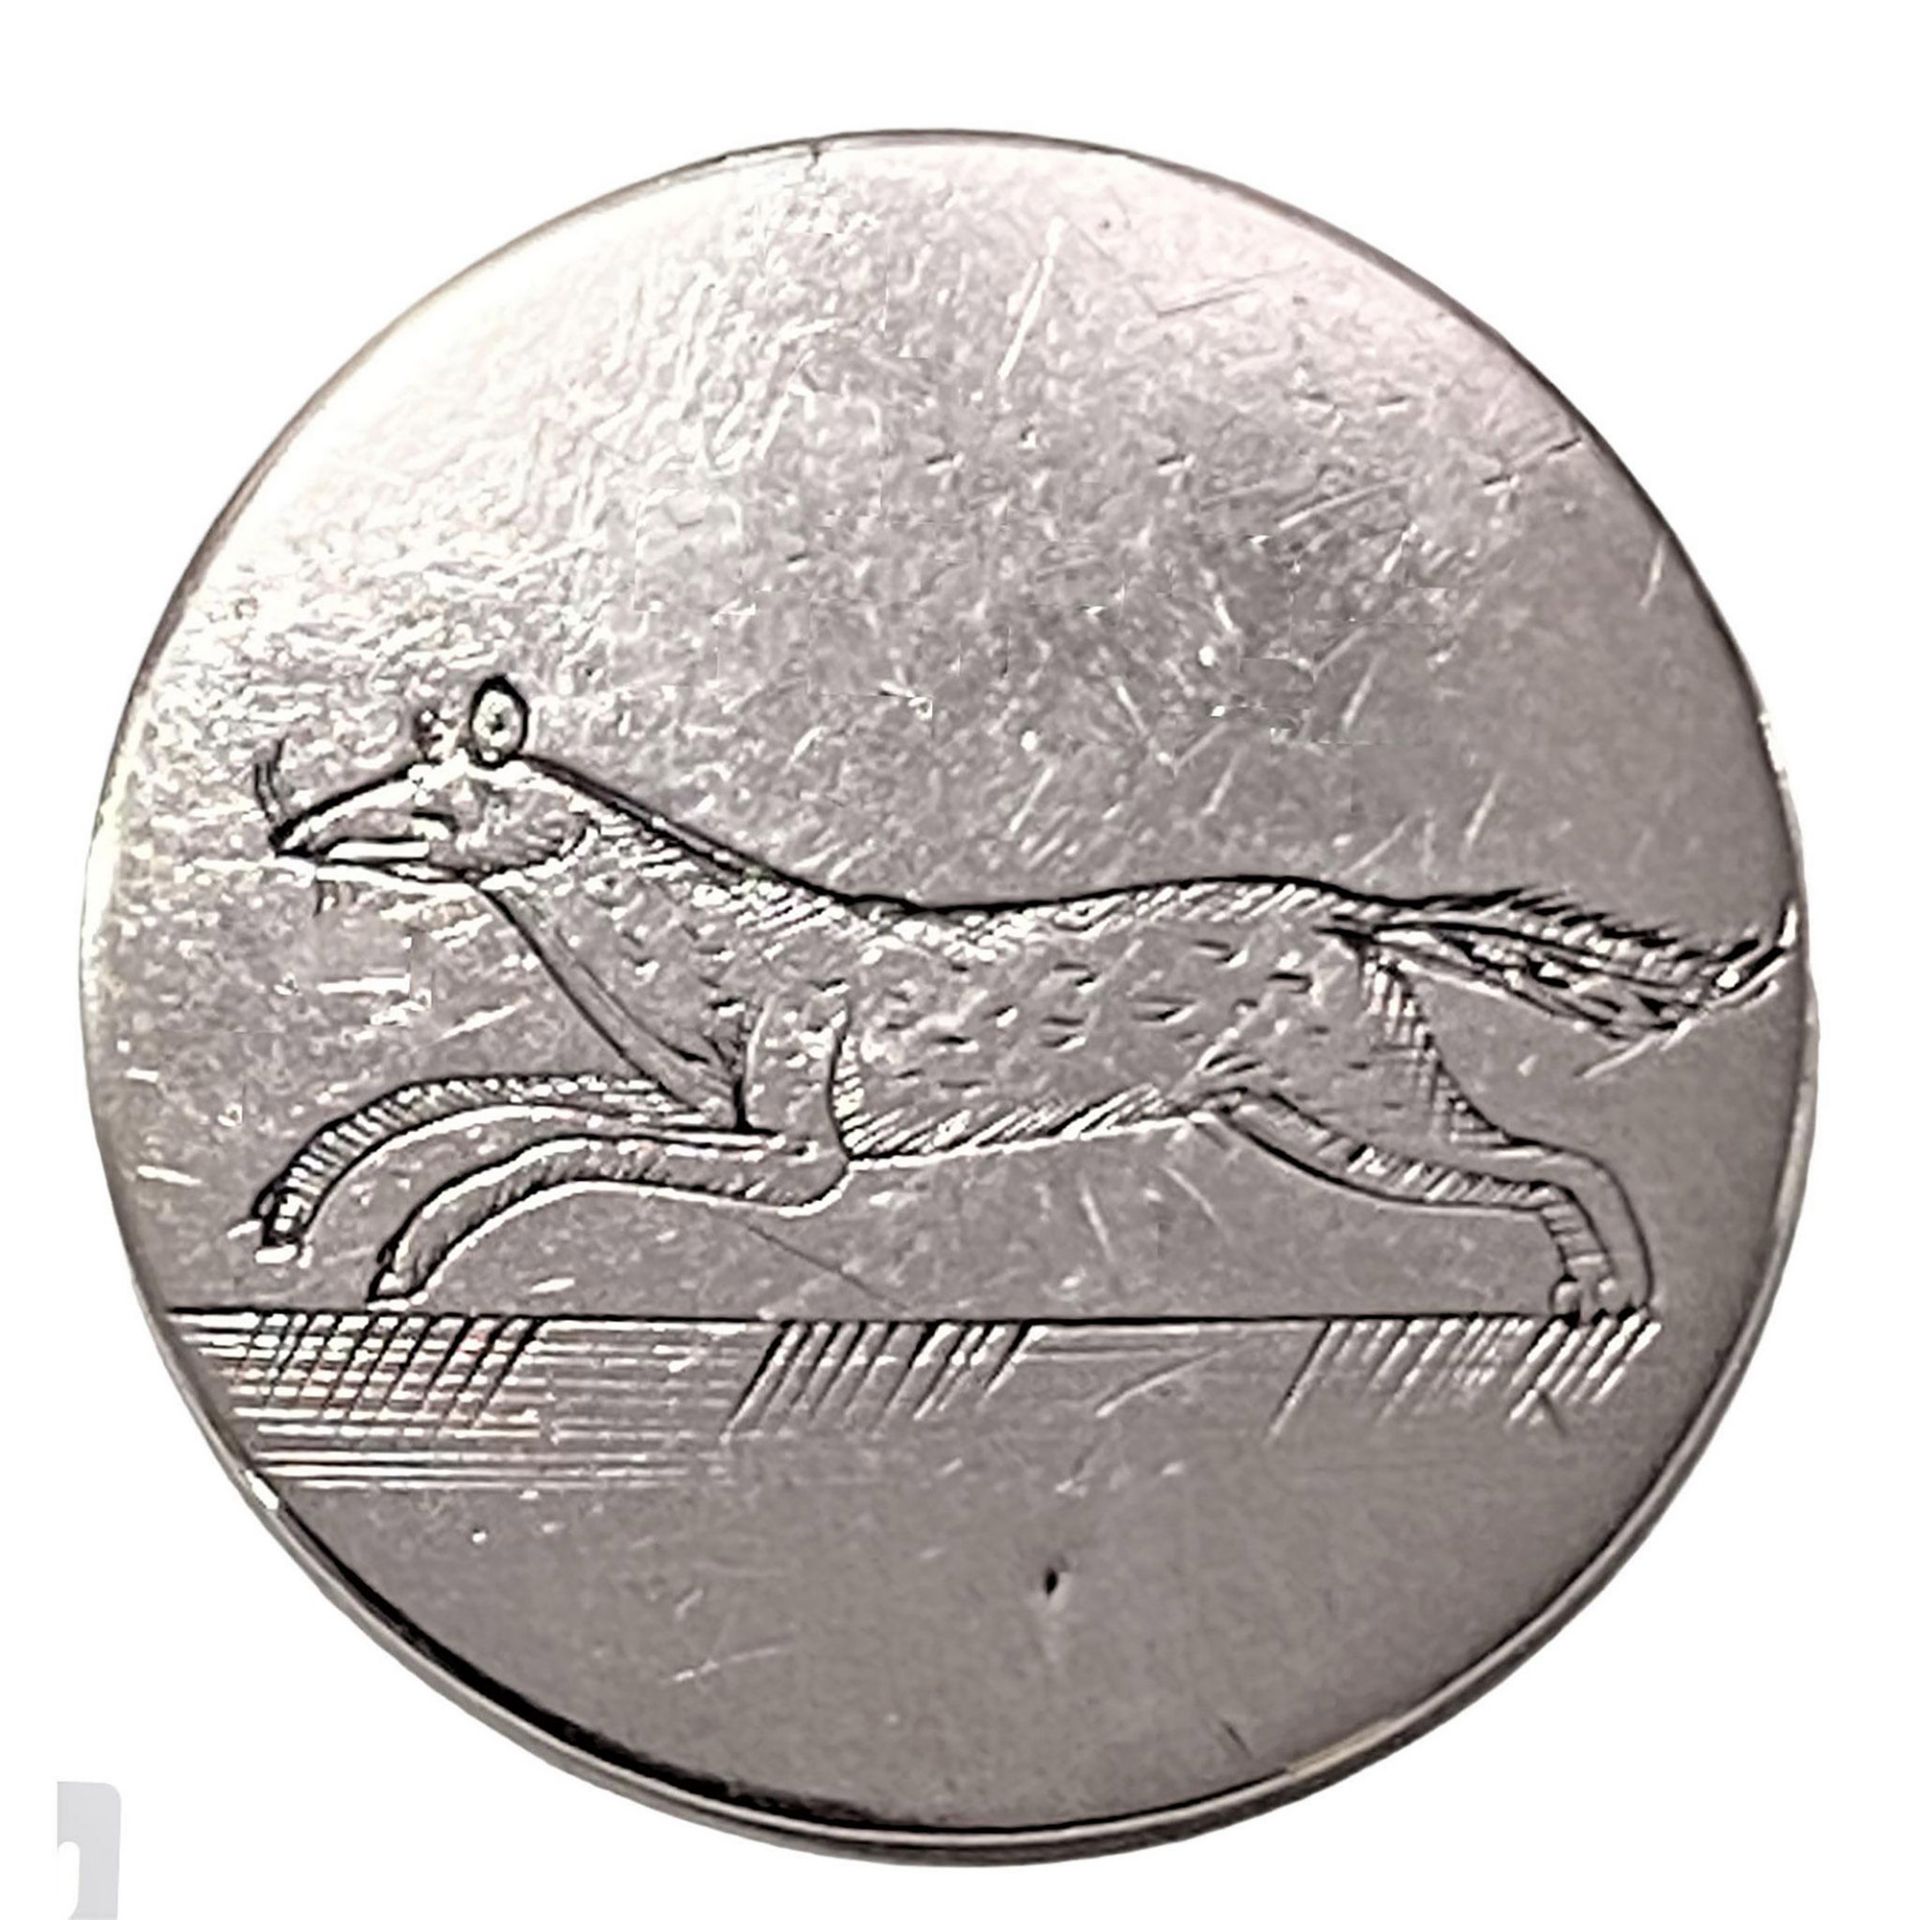 A Division One Silver Dog Button